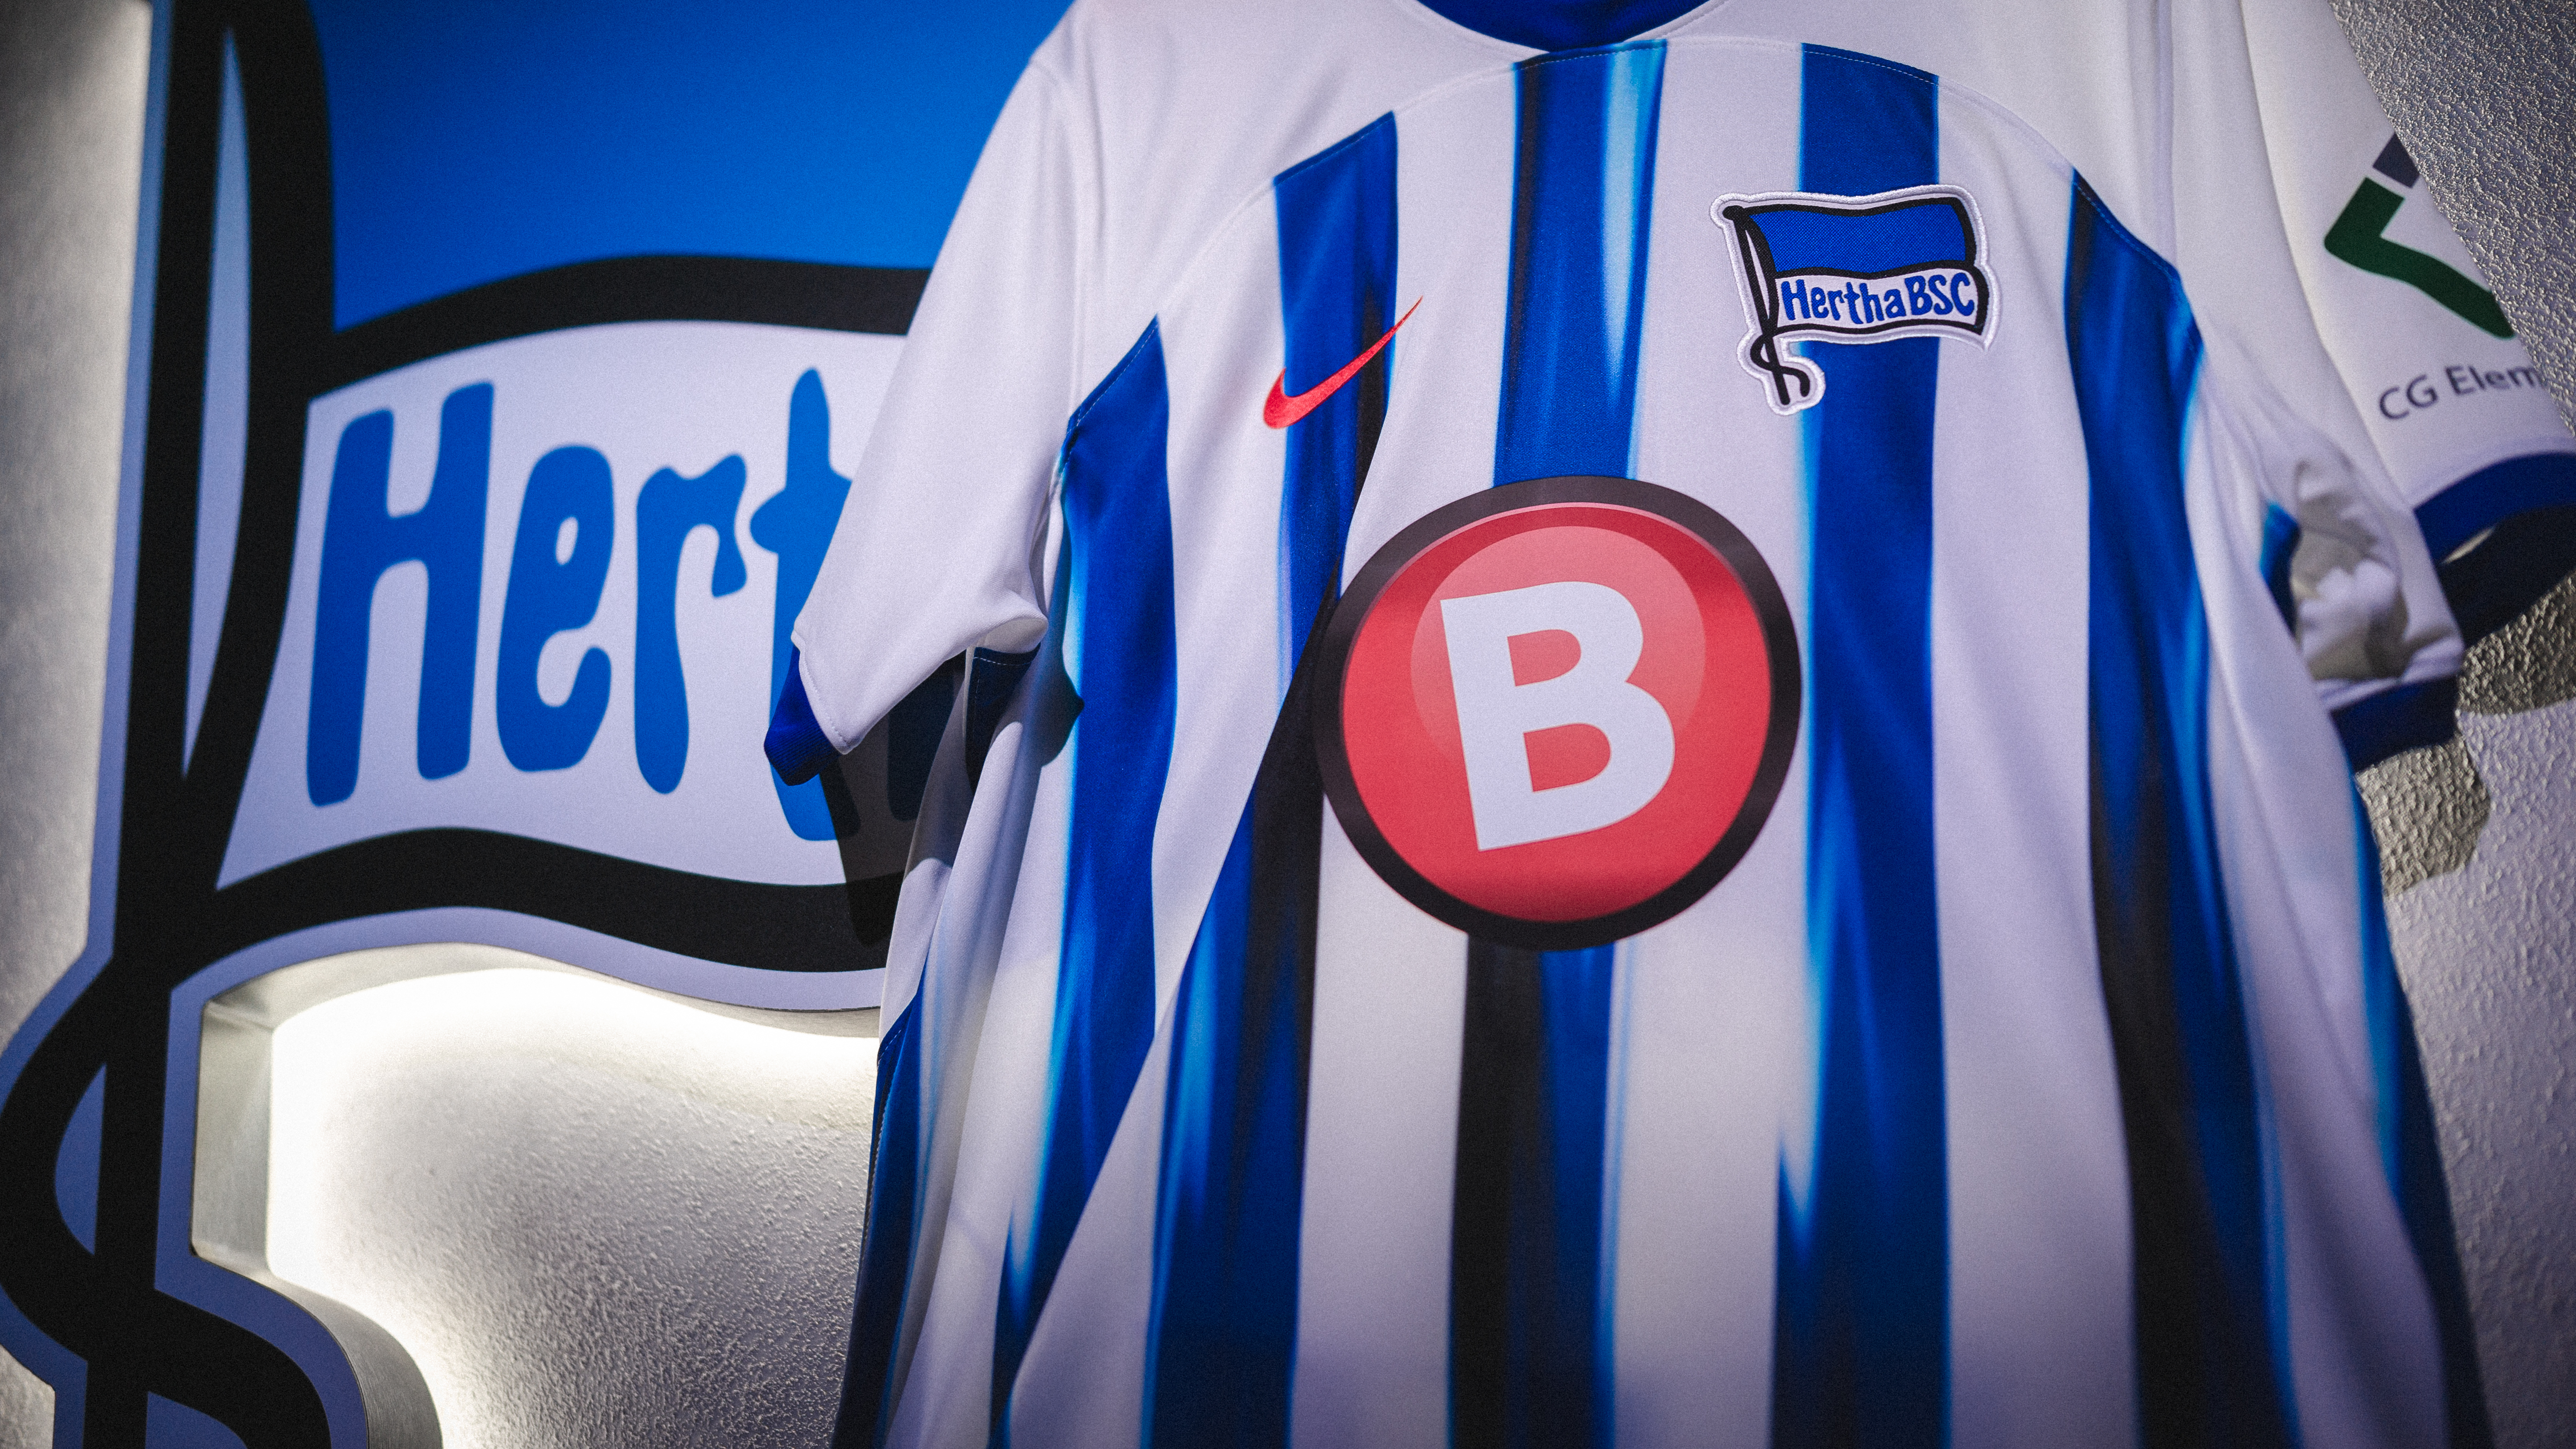 Our home shirt with the CrazyBuzzer logo on